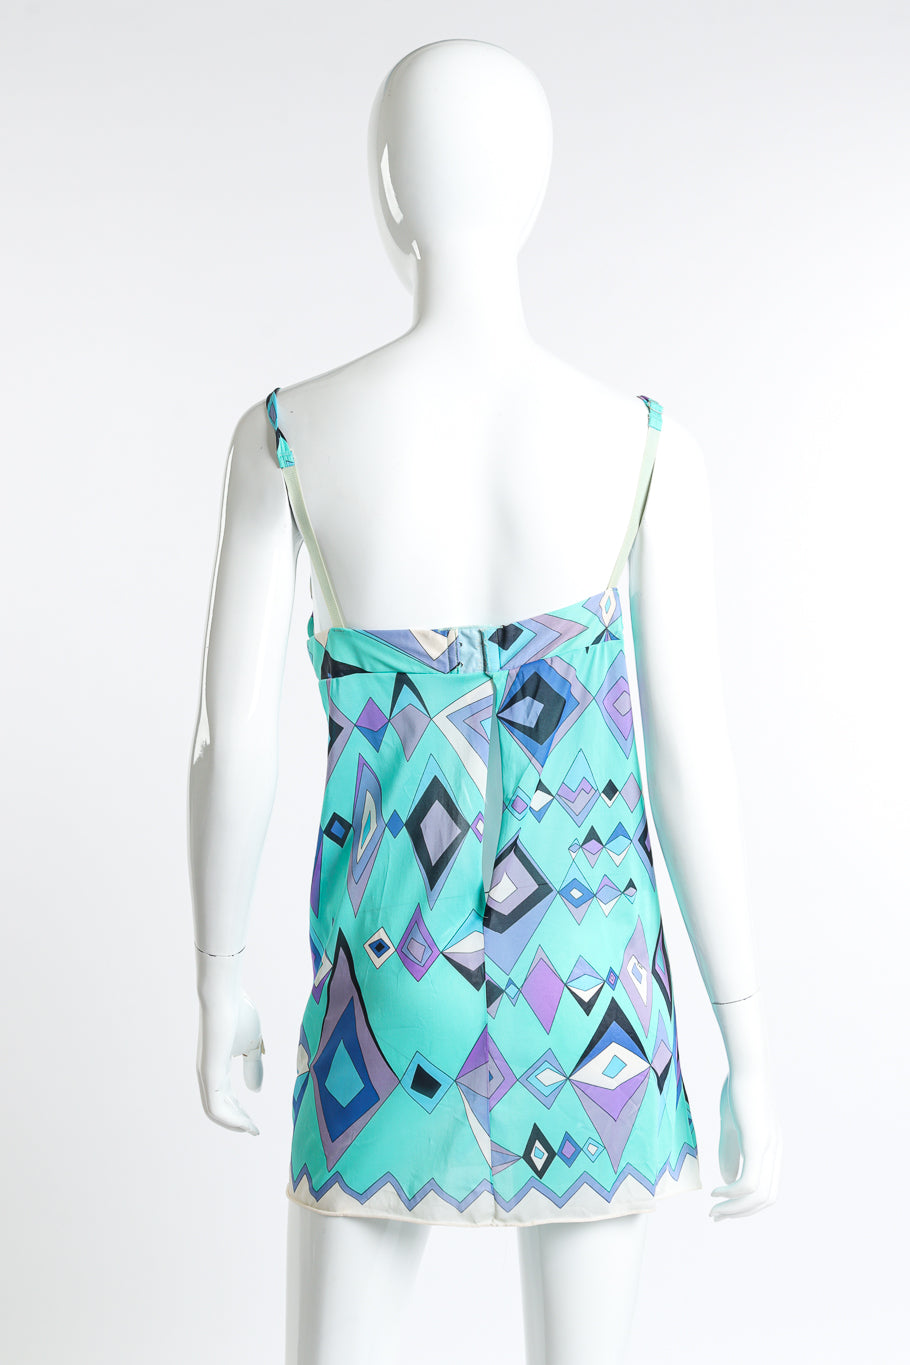 Vintage Emilio Pucci for Formfit Rogers teal purple and white geo chemise slip dress back view as worn on mannequin @Recess LA